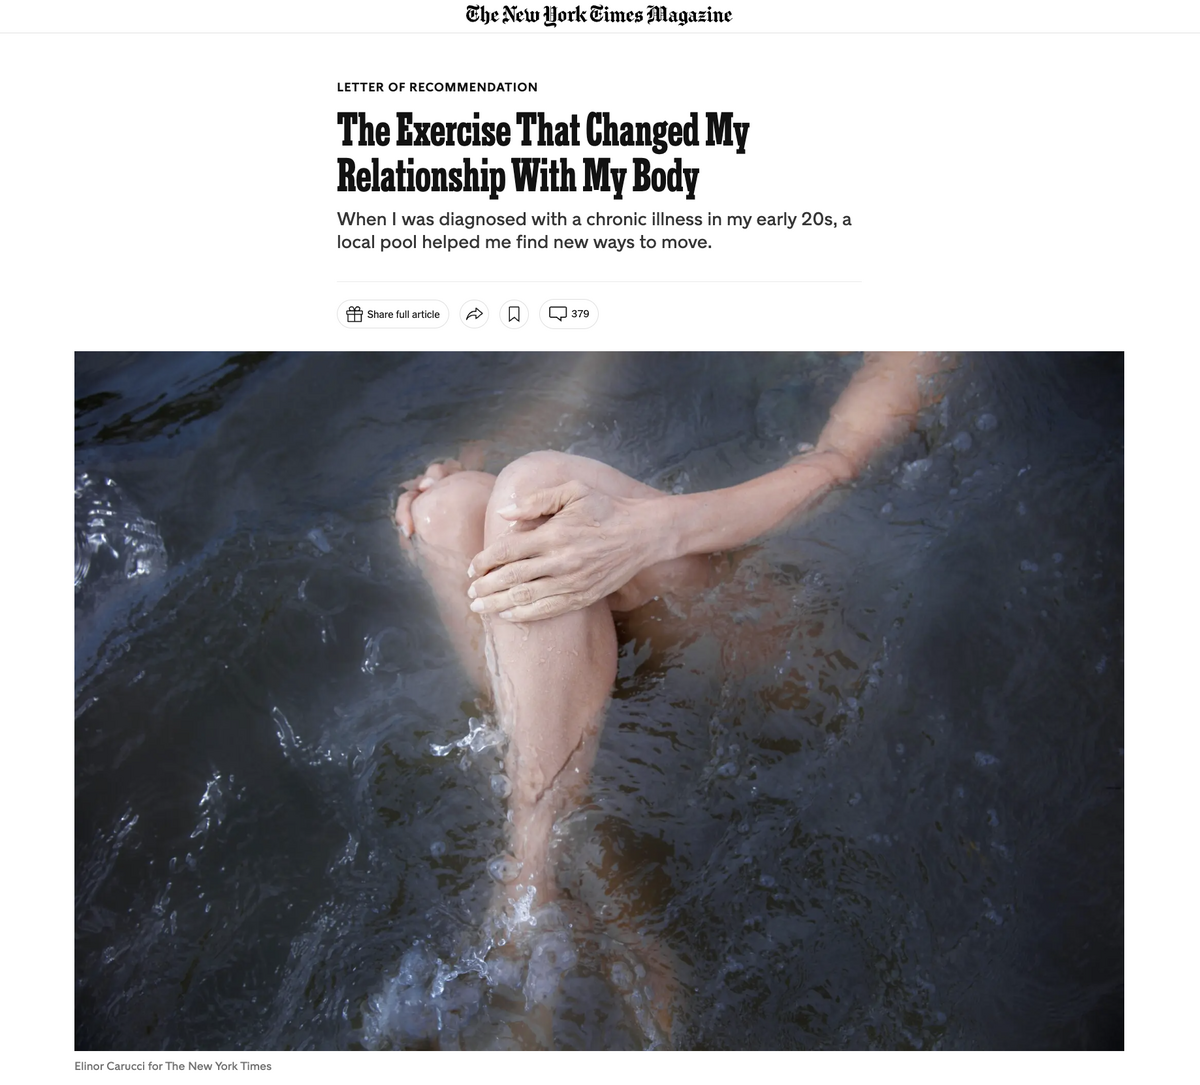 The New York Times Magazine, The Exercise That Changed My Relationship With My Body